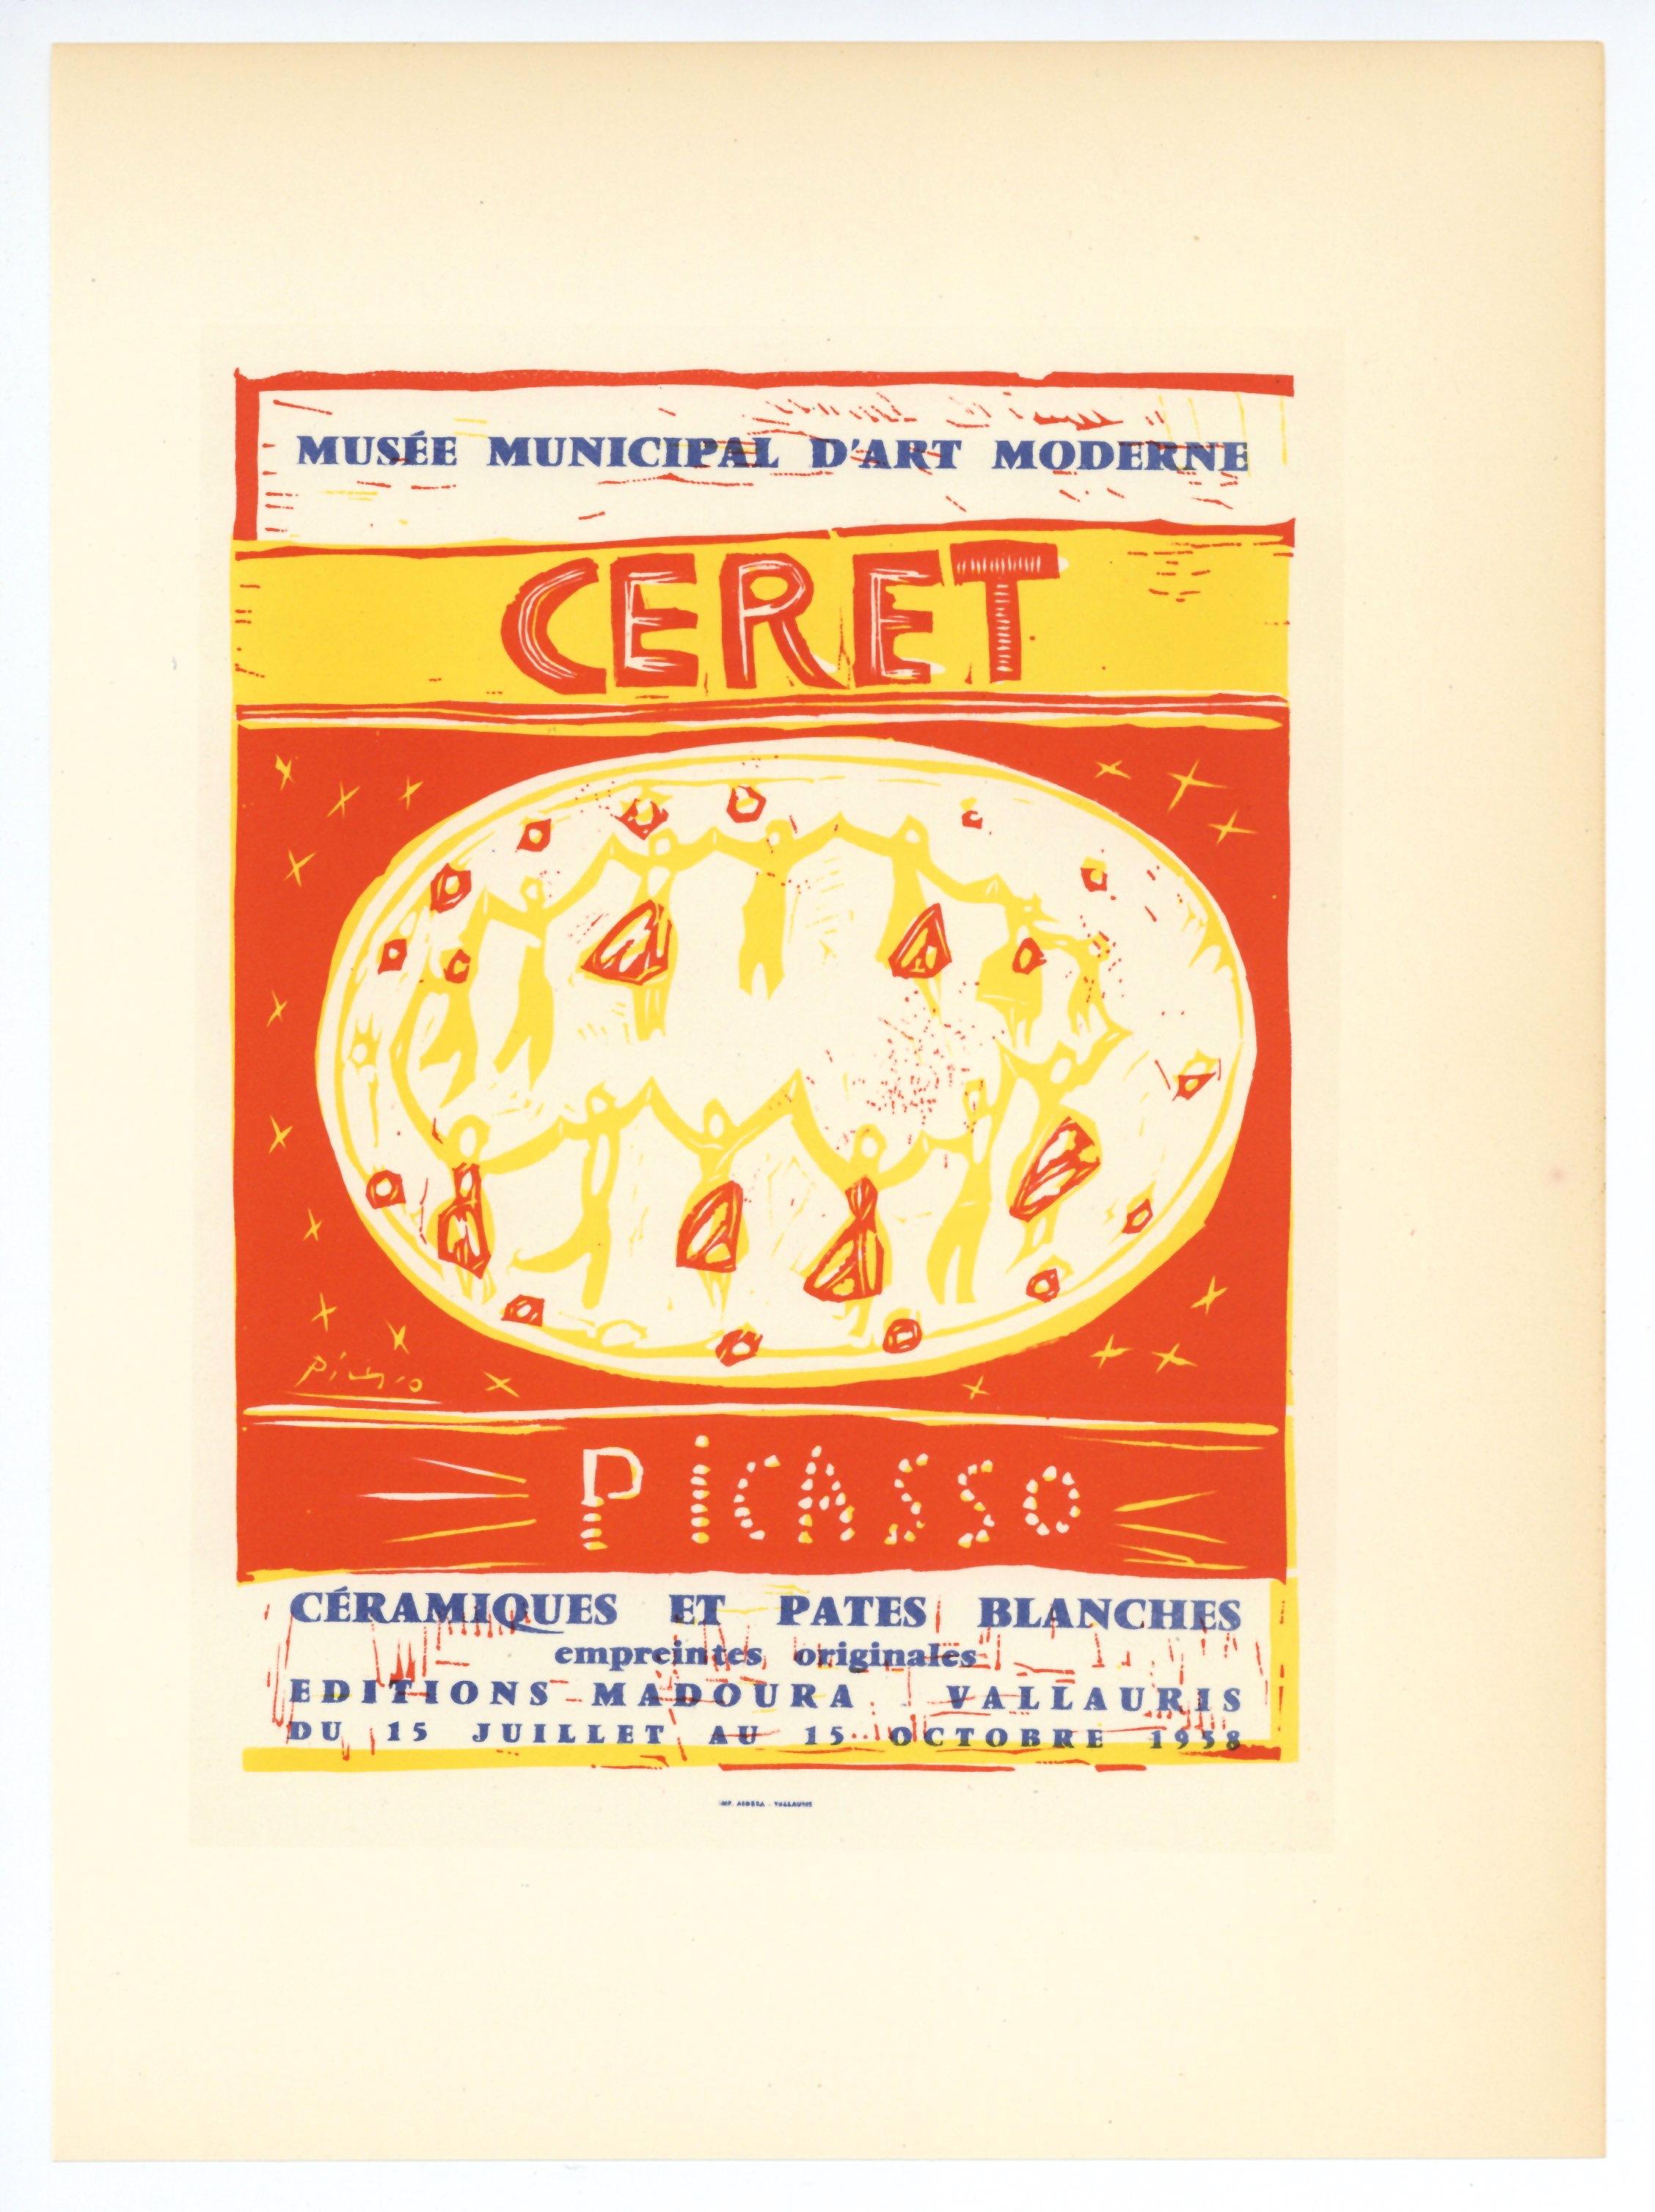 "Musee Municipal Ceret" lithograph poster - Print by (after) Pablo Picasso